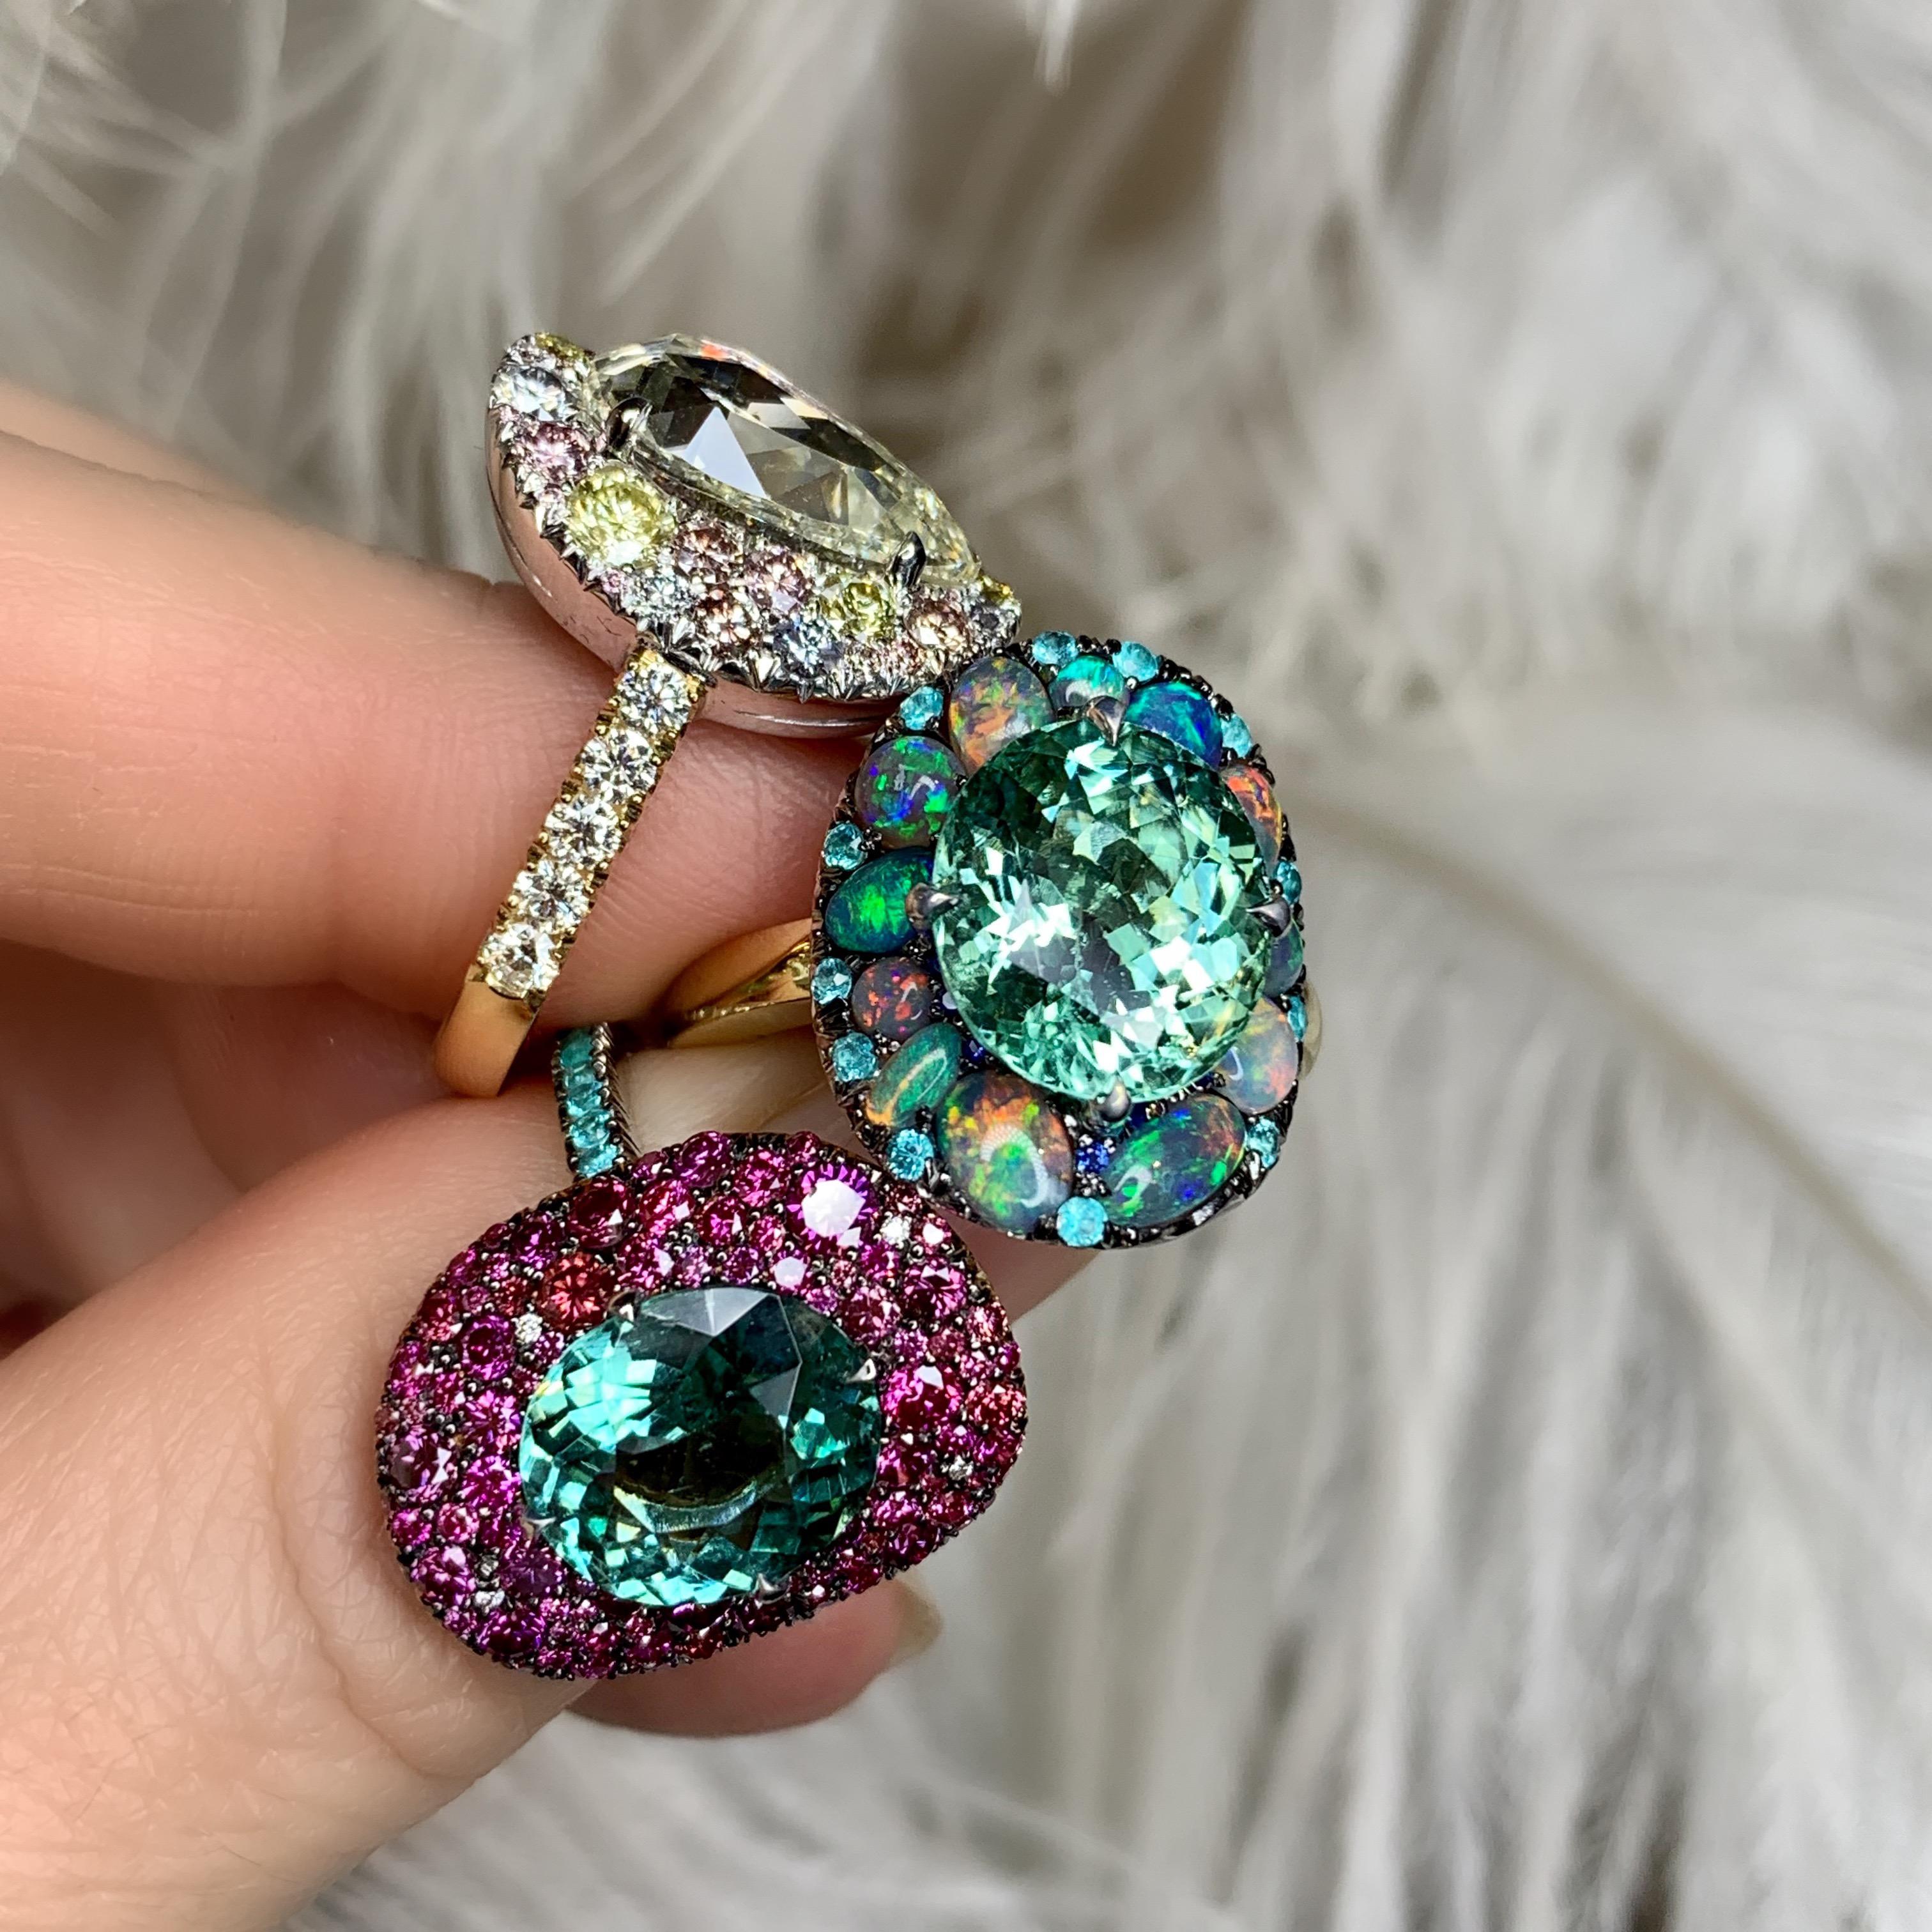 One of a kind ring in 18K yellow & White gold 16,5 g. set with a Lagoon Tourmaline centerstone 5,52 ct., Black Opal cabochons 1,67 ct., Paraïba Tourmaline 0,3 ct. and royal blue sapphires 0,055 ct.  Handmade the traditional way, ajour on the inside.